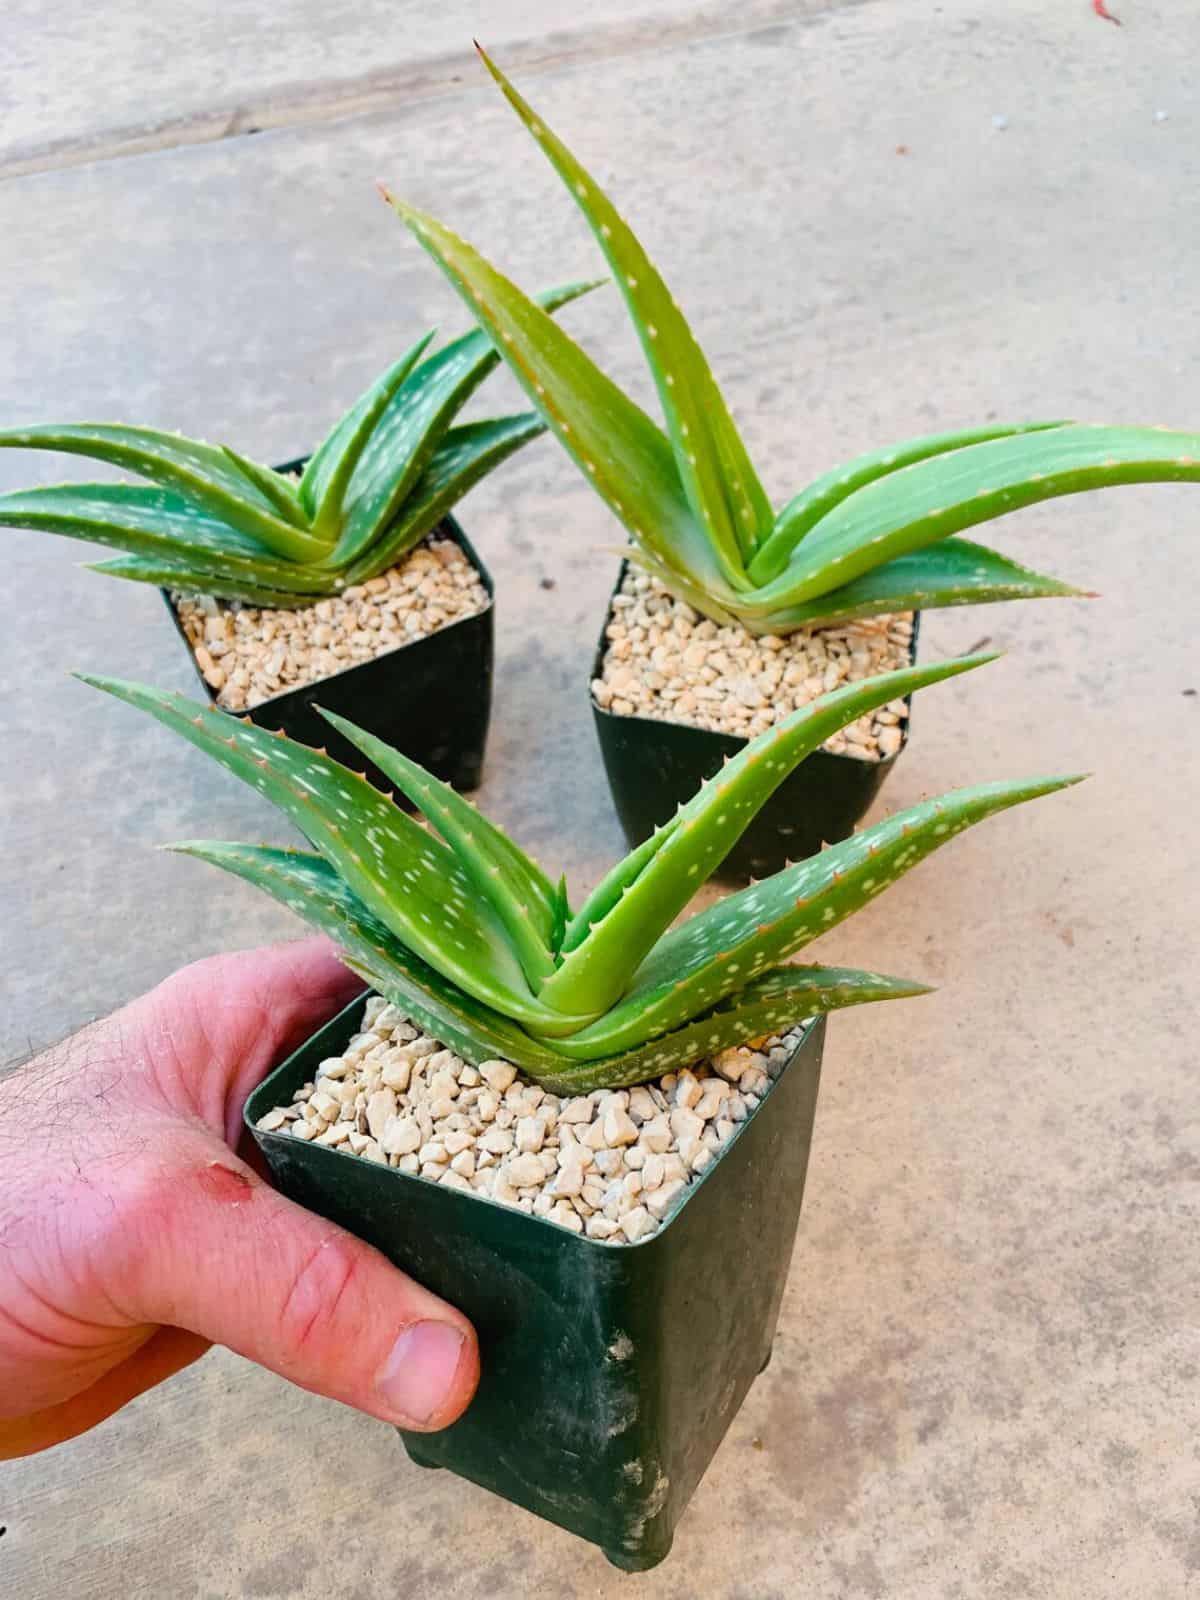 Three Aloe megalacanthas grow in small plastic pots.